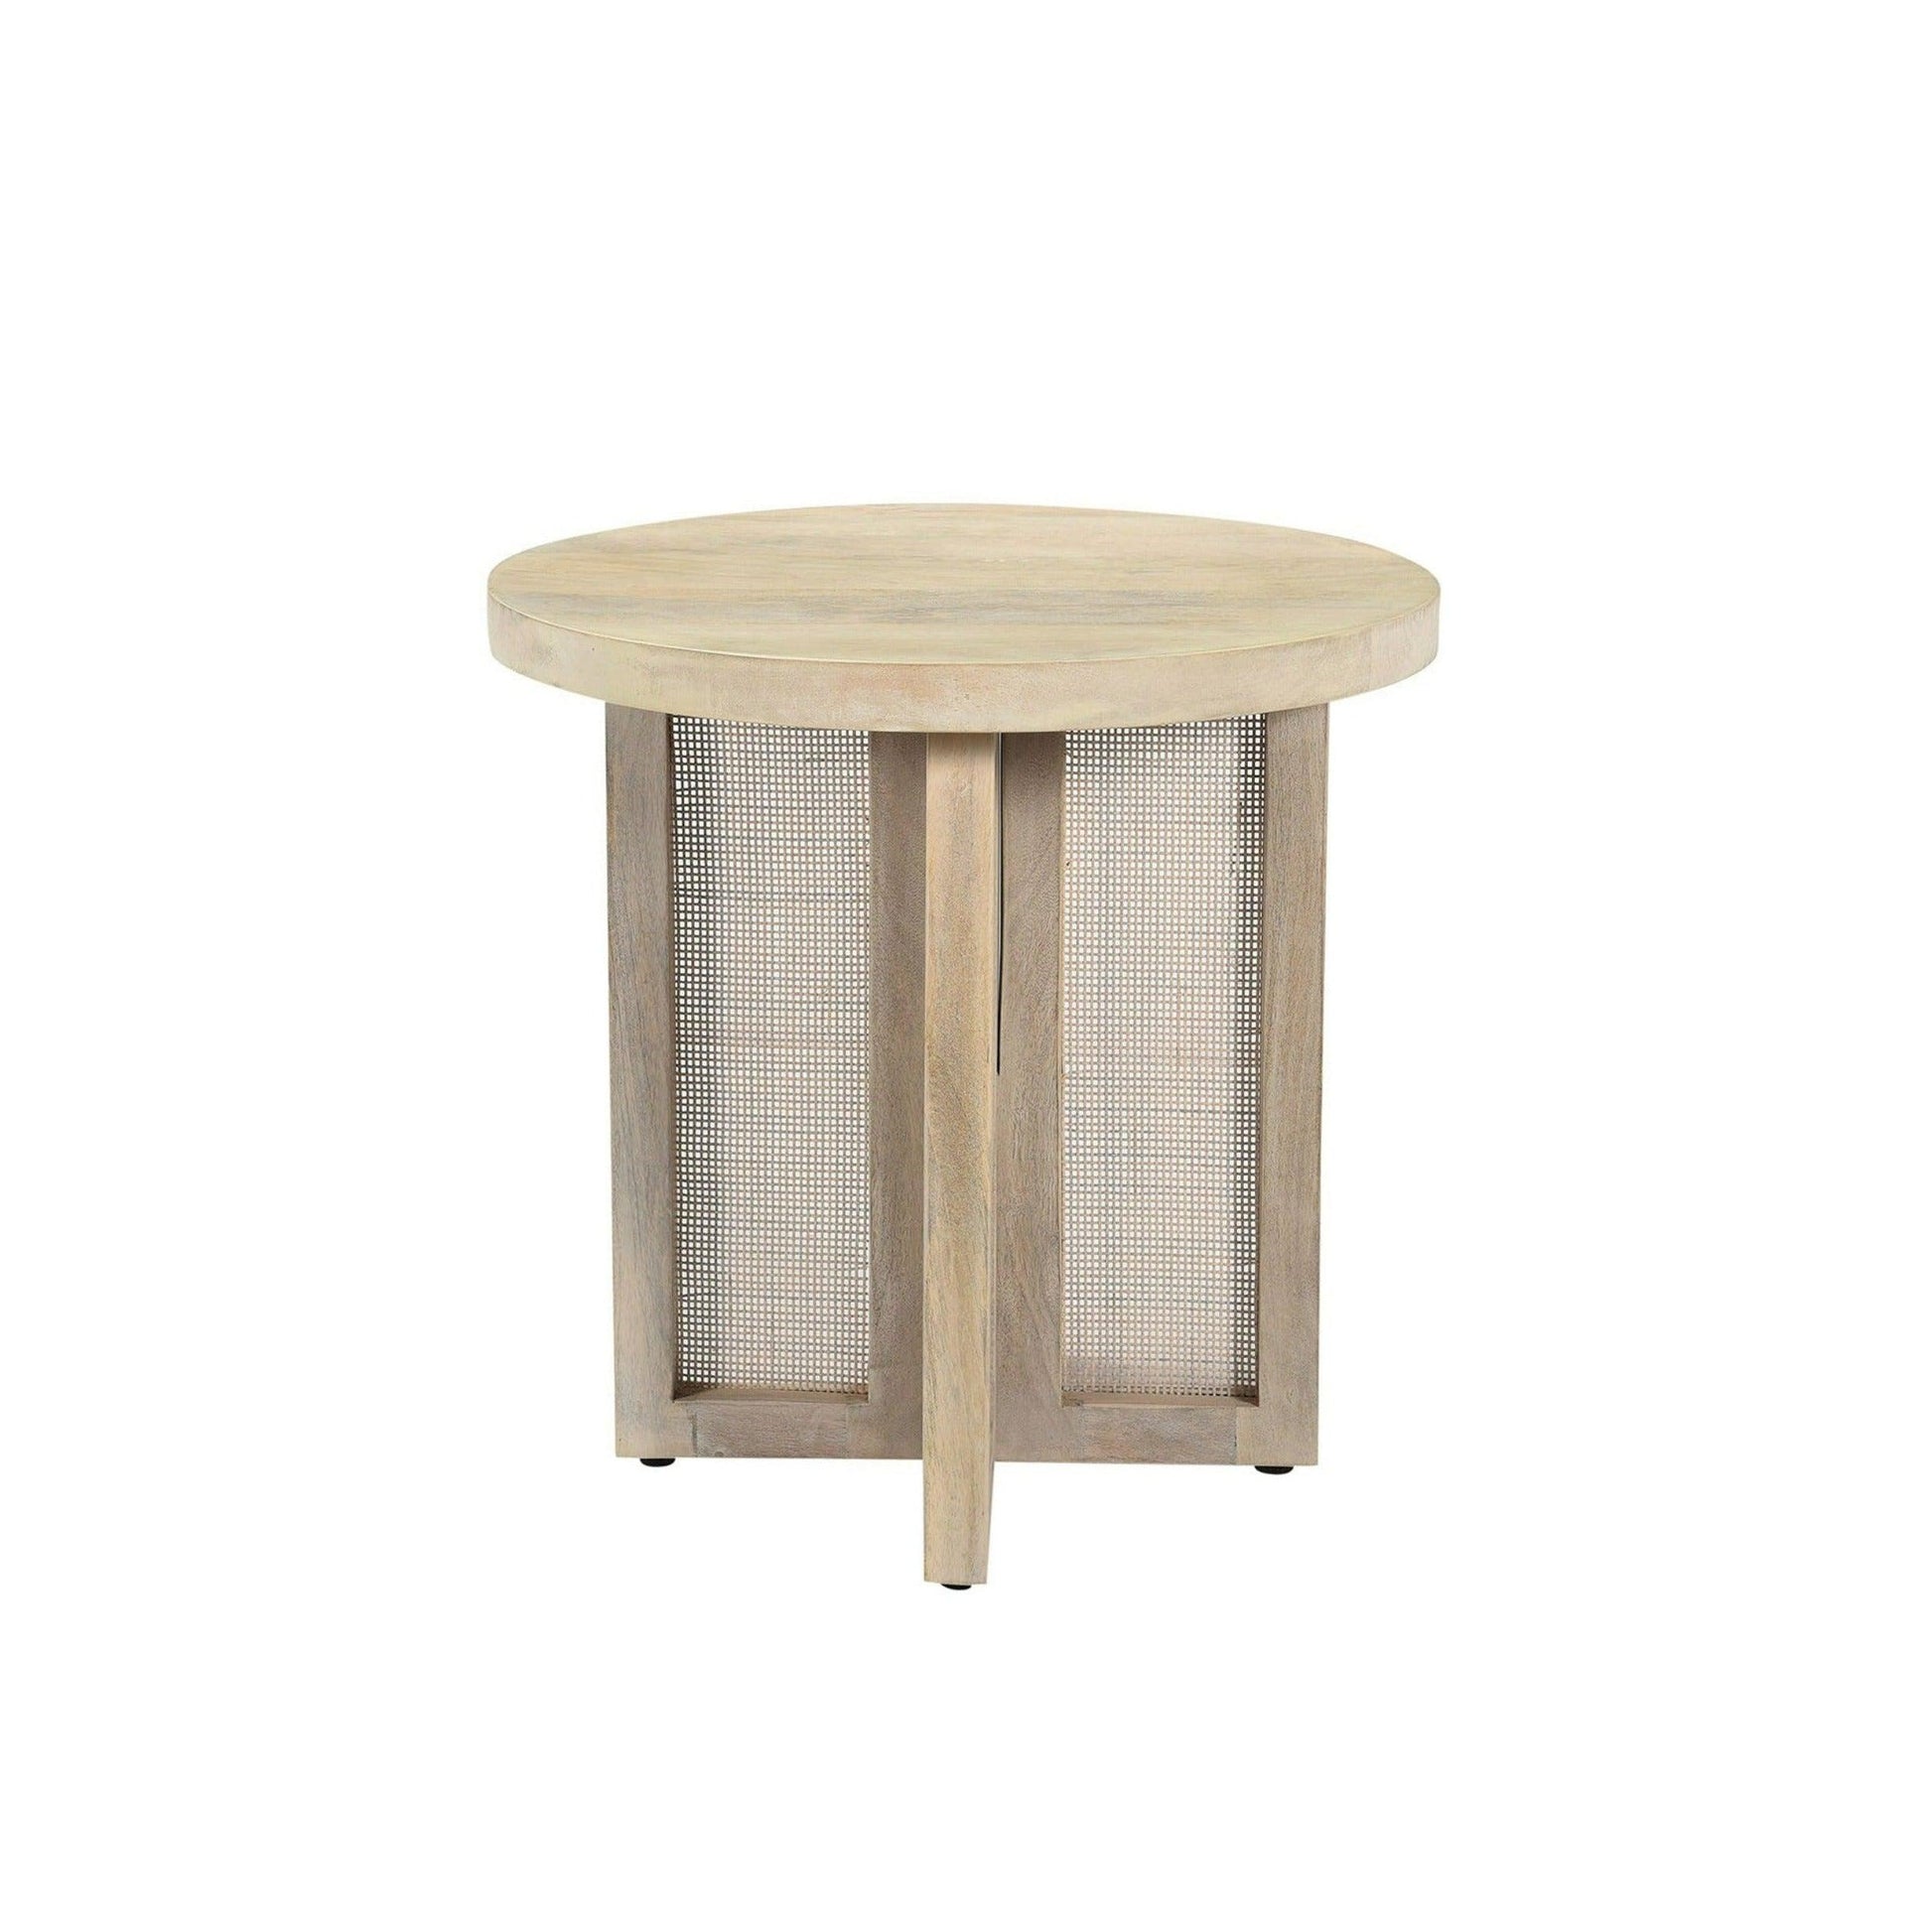 a round table with a mesh door on the top